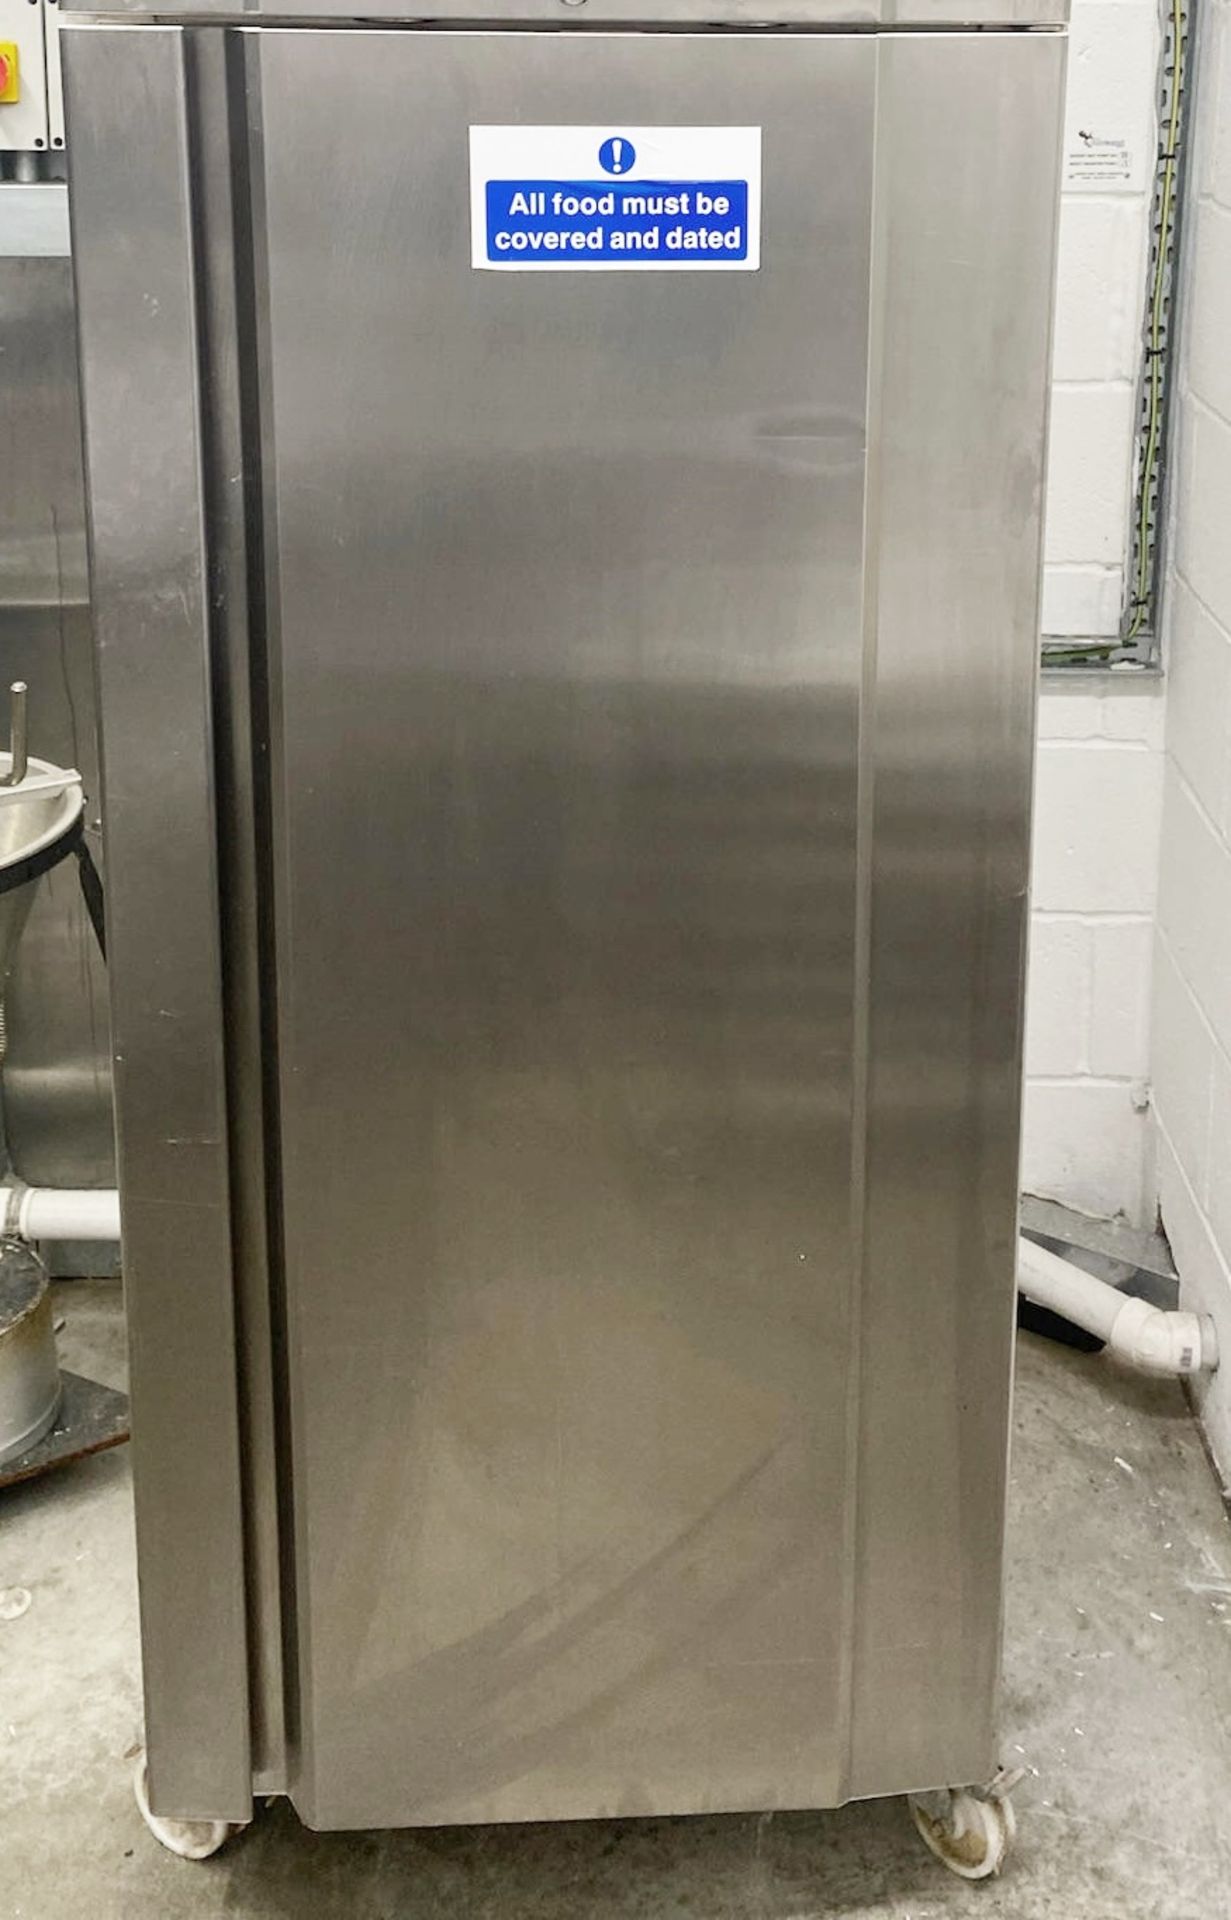 1 x Gram Upright Commercial Refrigerator With Stainless Steel Finish - Dimensions: H190 x D70 x D70 - Image 3 of 6